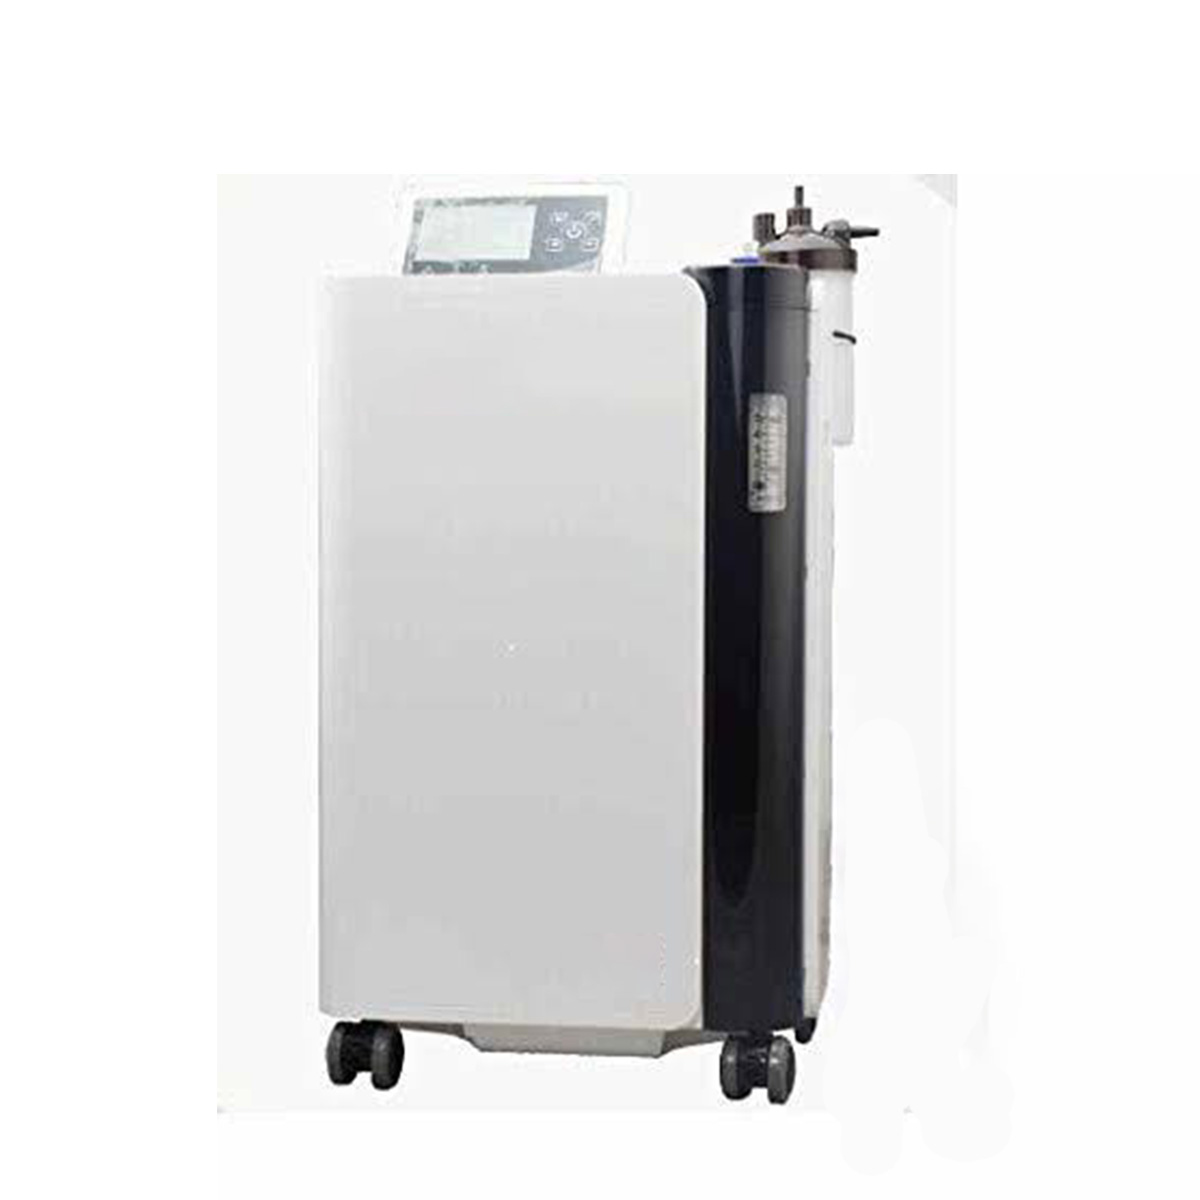 5 Lpm Oxymed Oxygen Concentrator On Sale Suppliers, Service Provider in Dlf belvedere towers